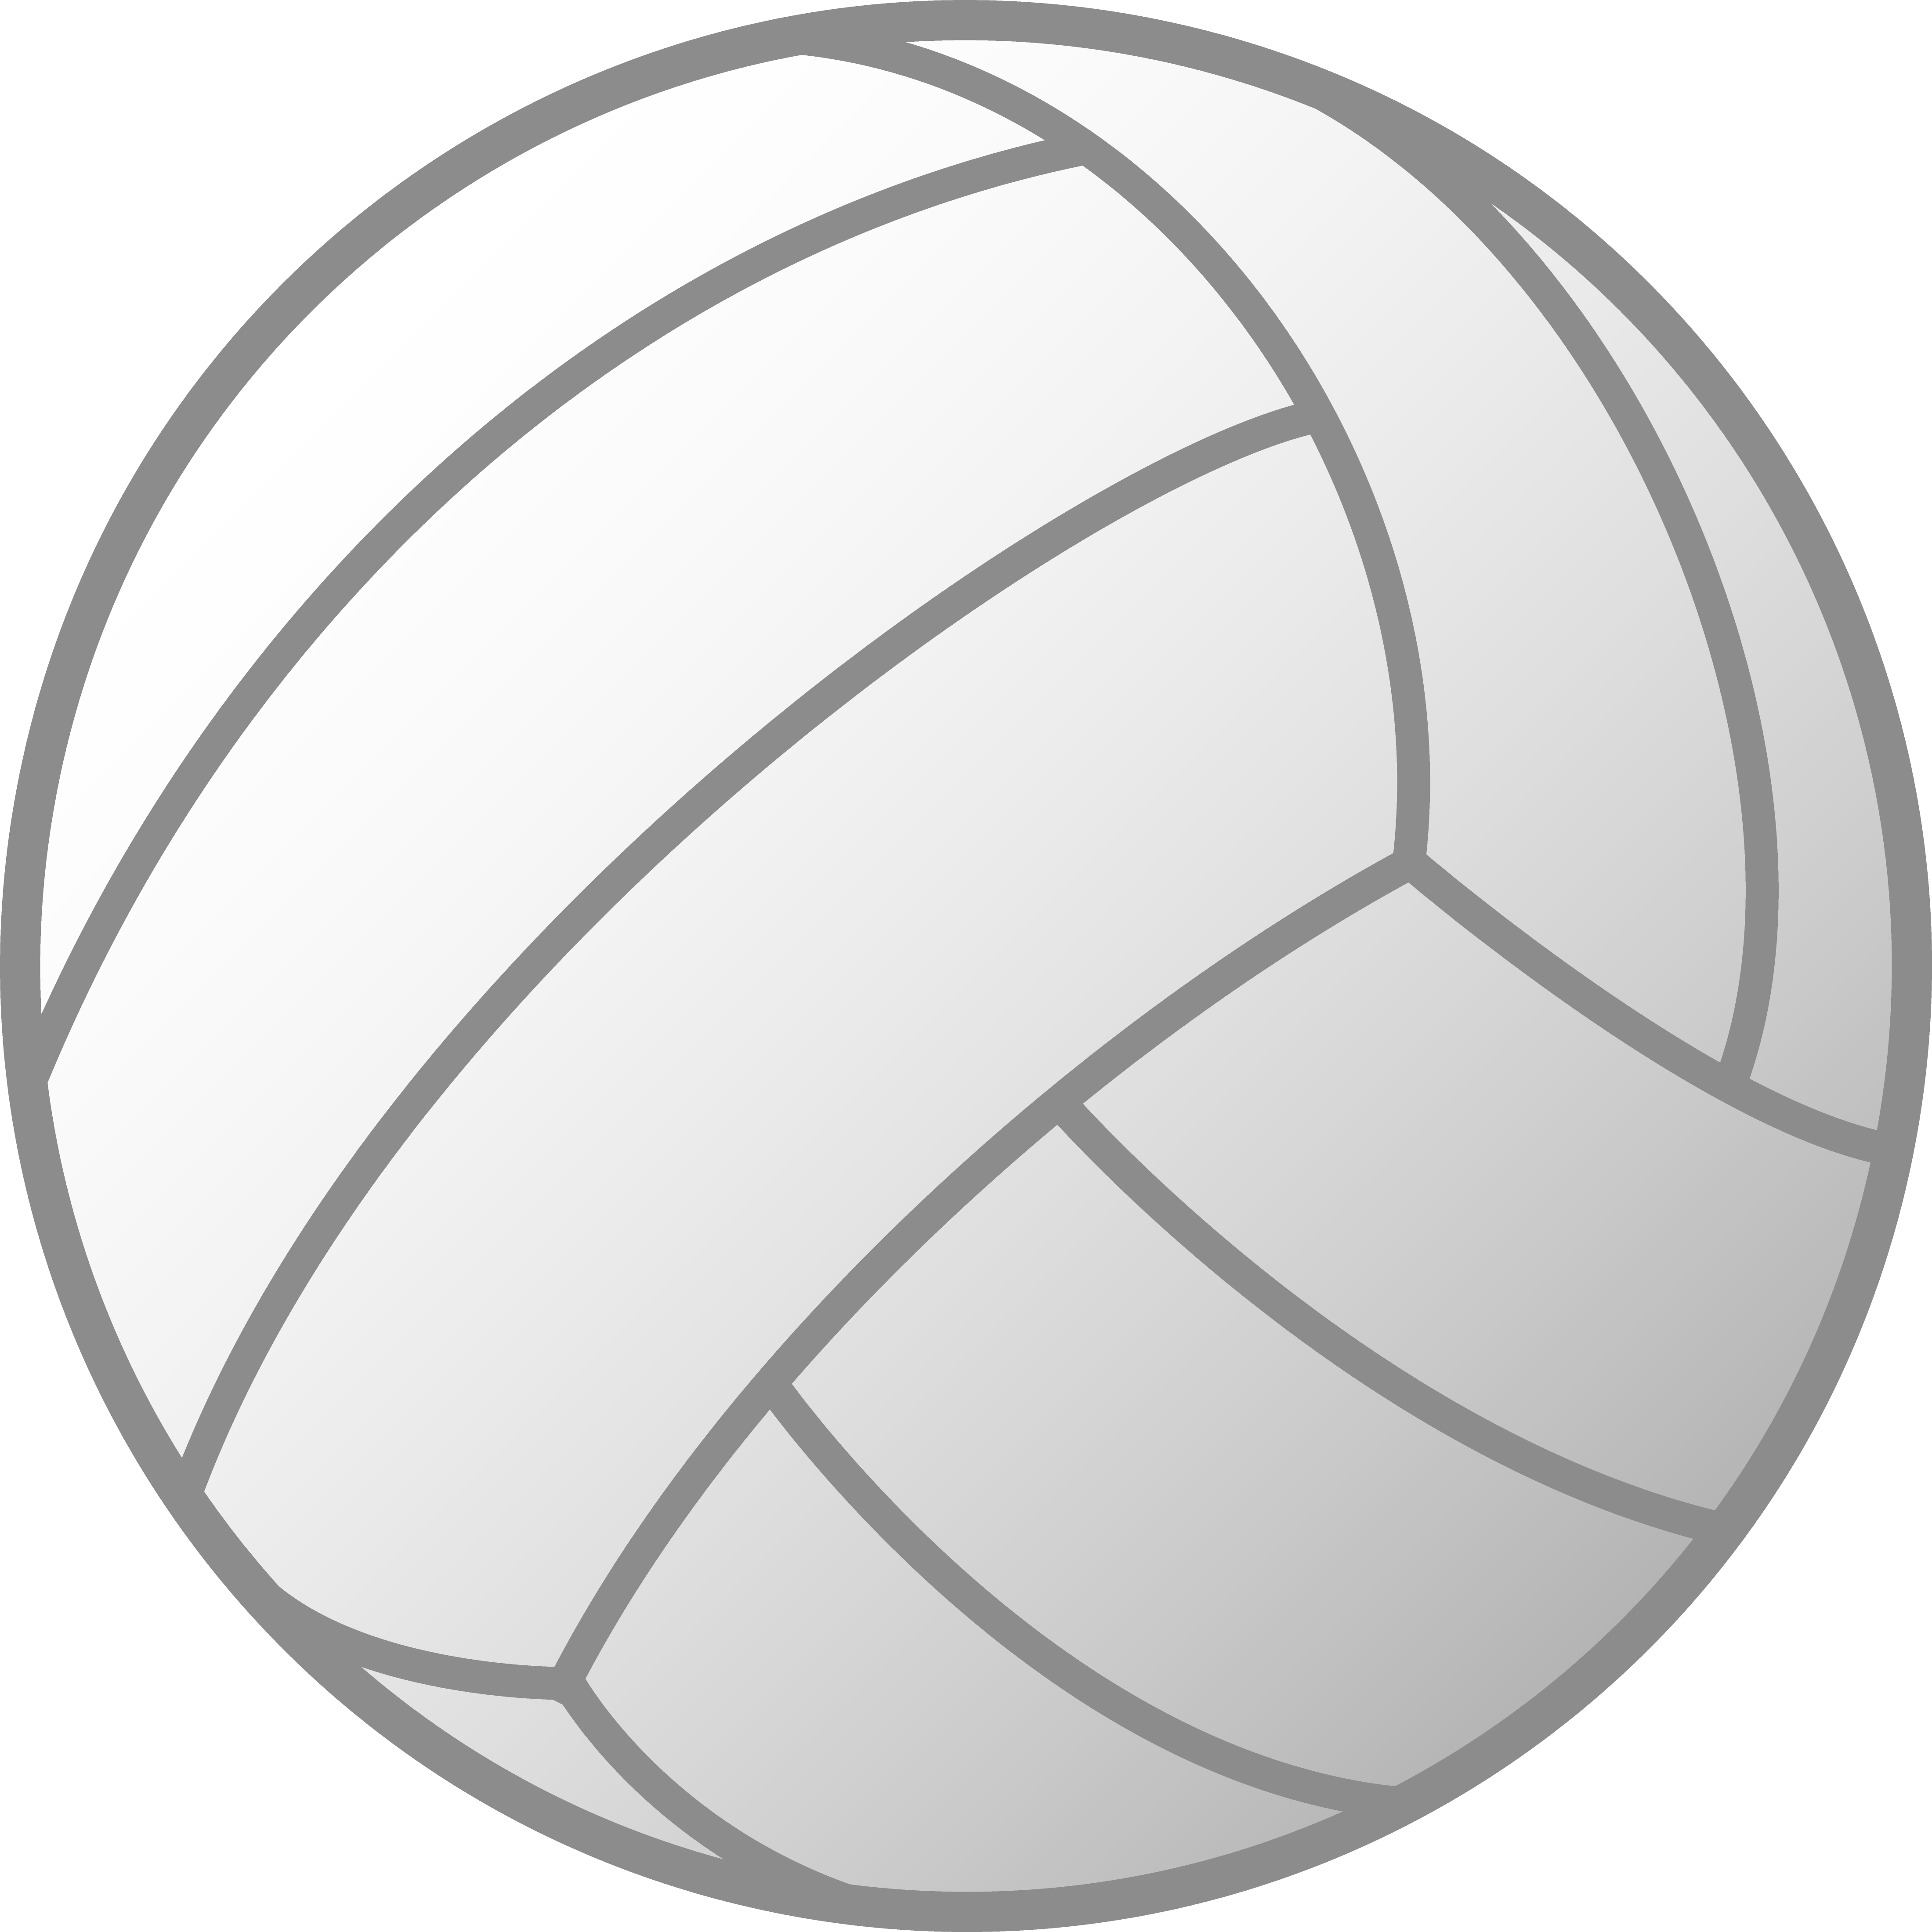 Volley ball clip art volleyball clip art black and white free